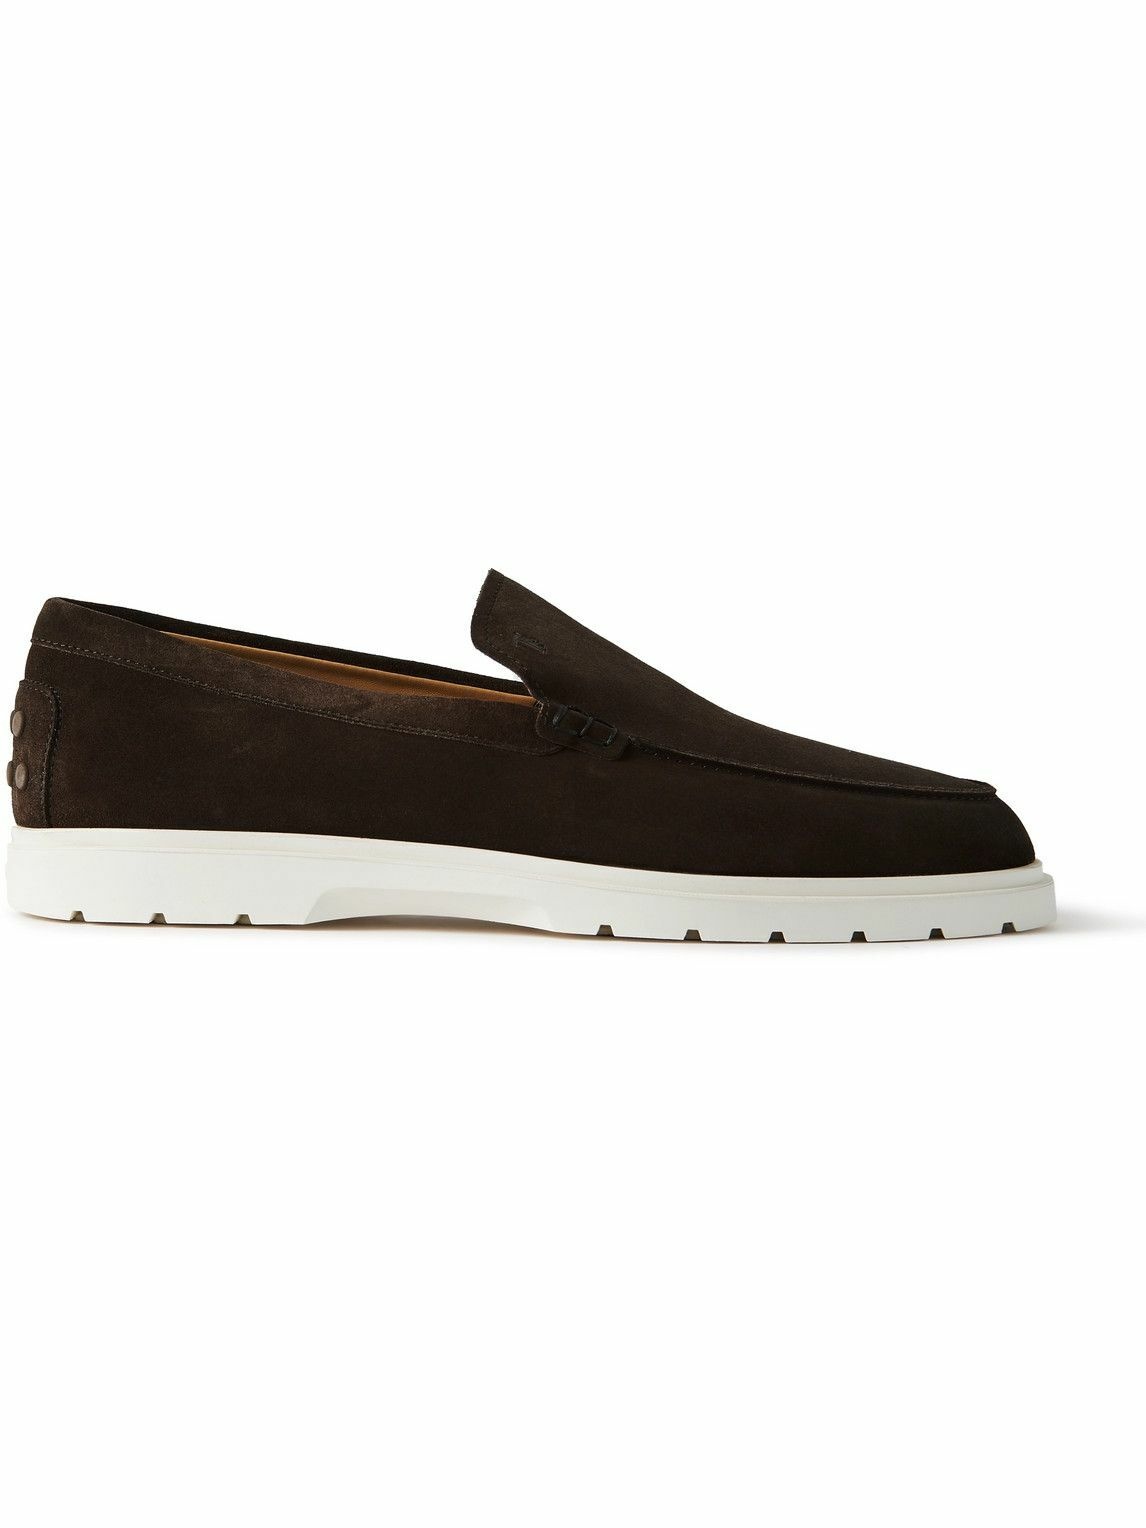 Tod's - Gommino Suede Loafers - Brown Tod's